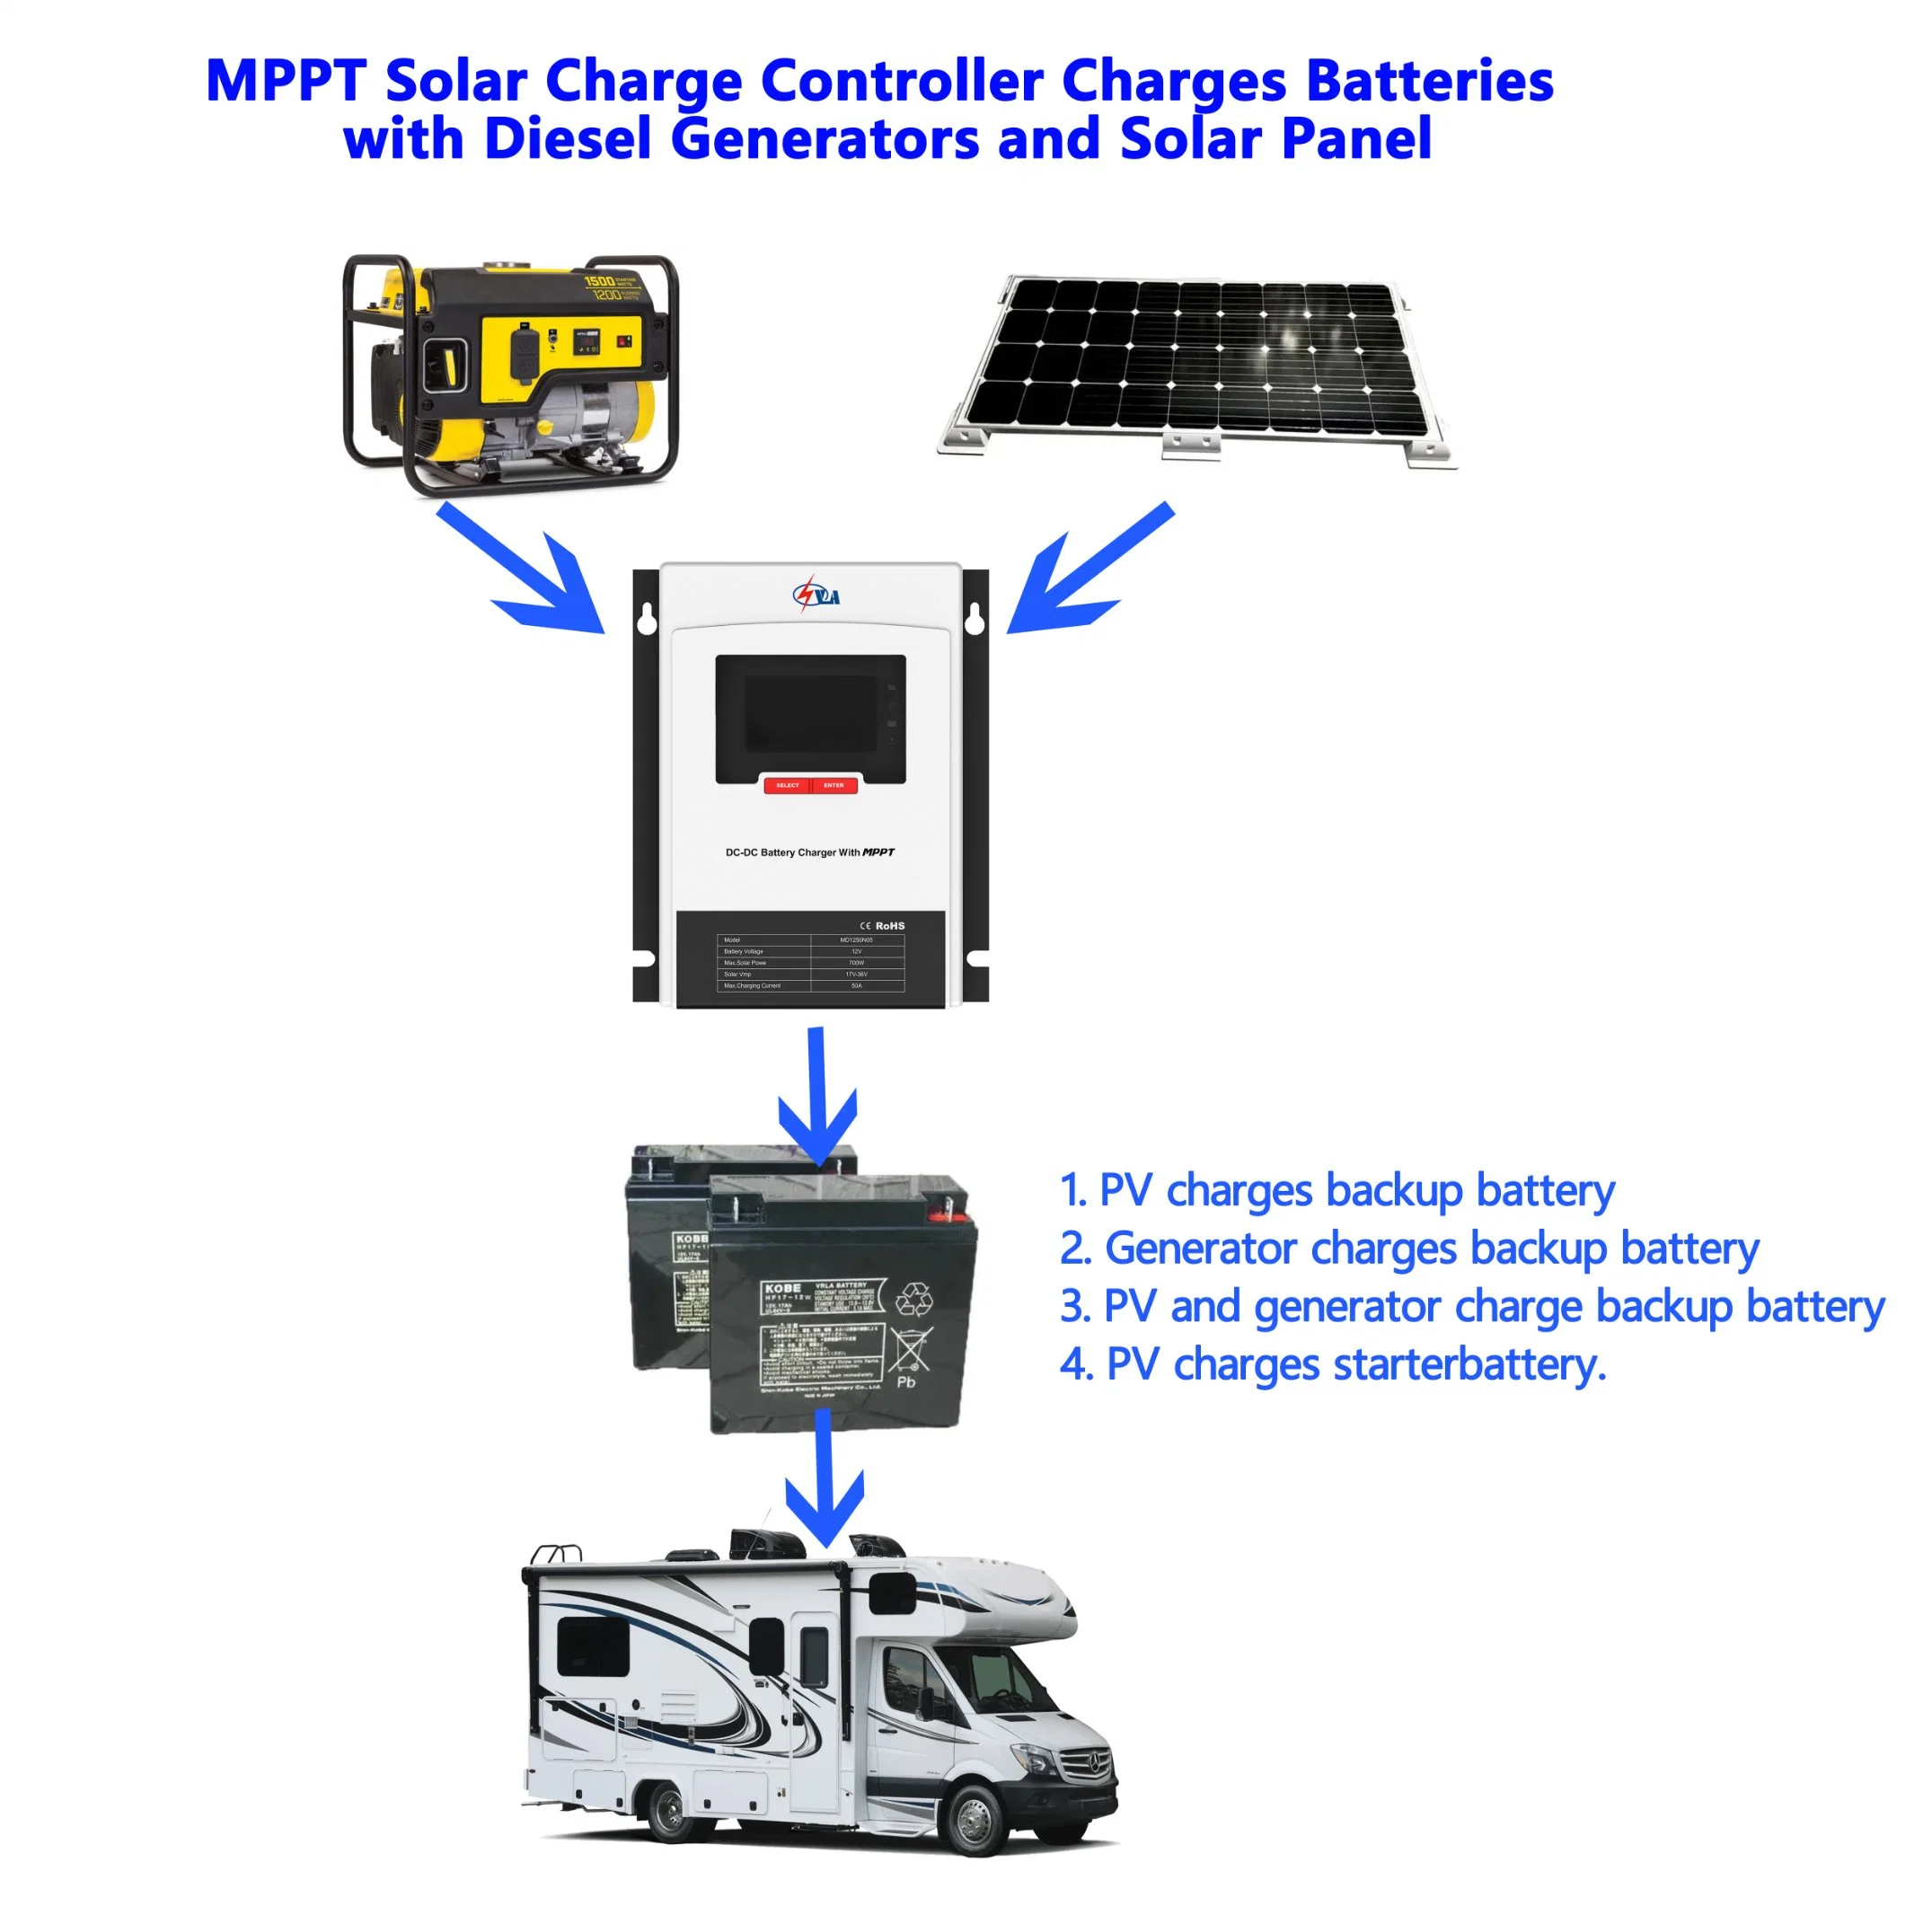 MPPT Solar & Generator DC Charge Controller Special for RV Motor Home Caravans Truck Boat Yacht 3 Years Warranty off Grid Solar